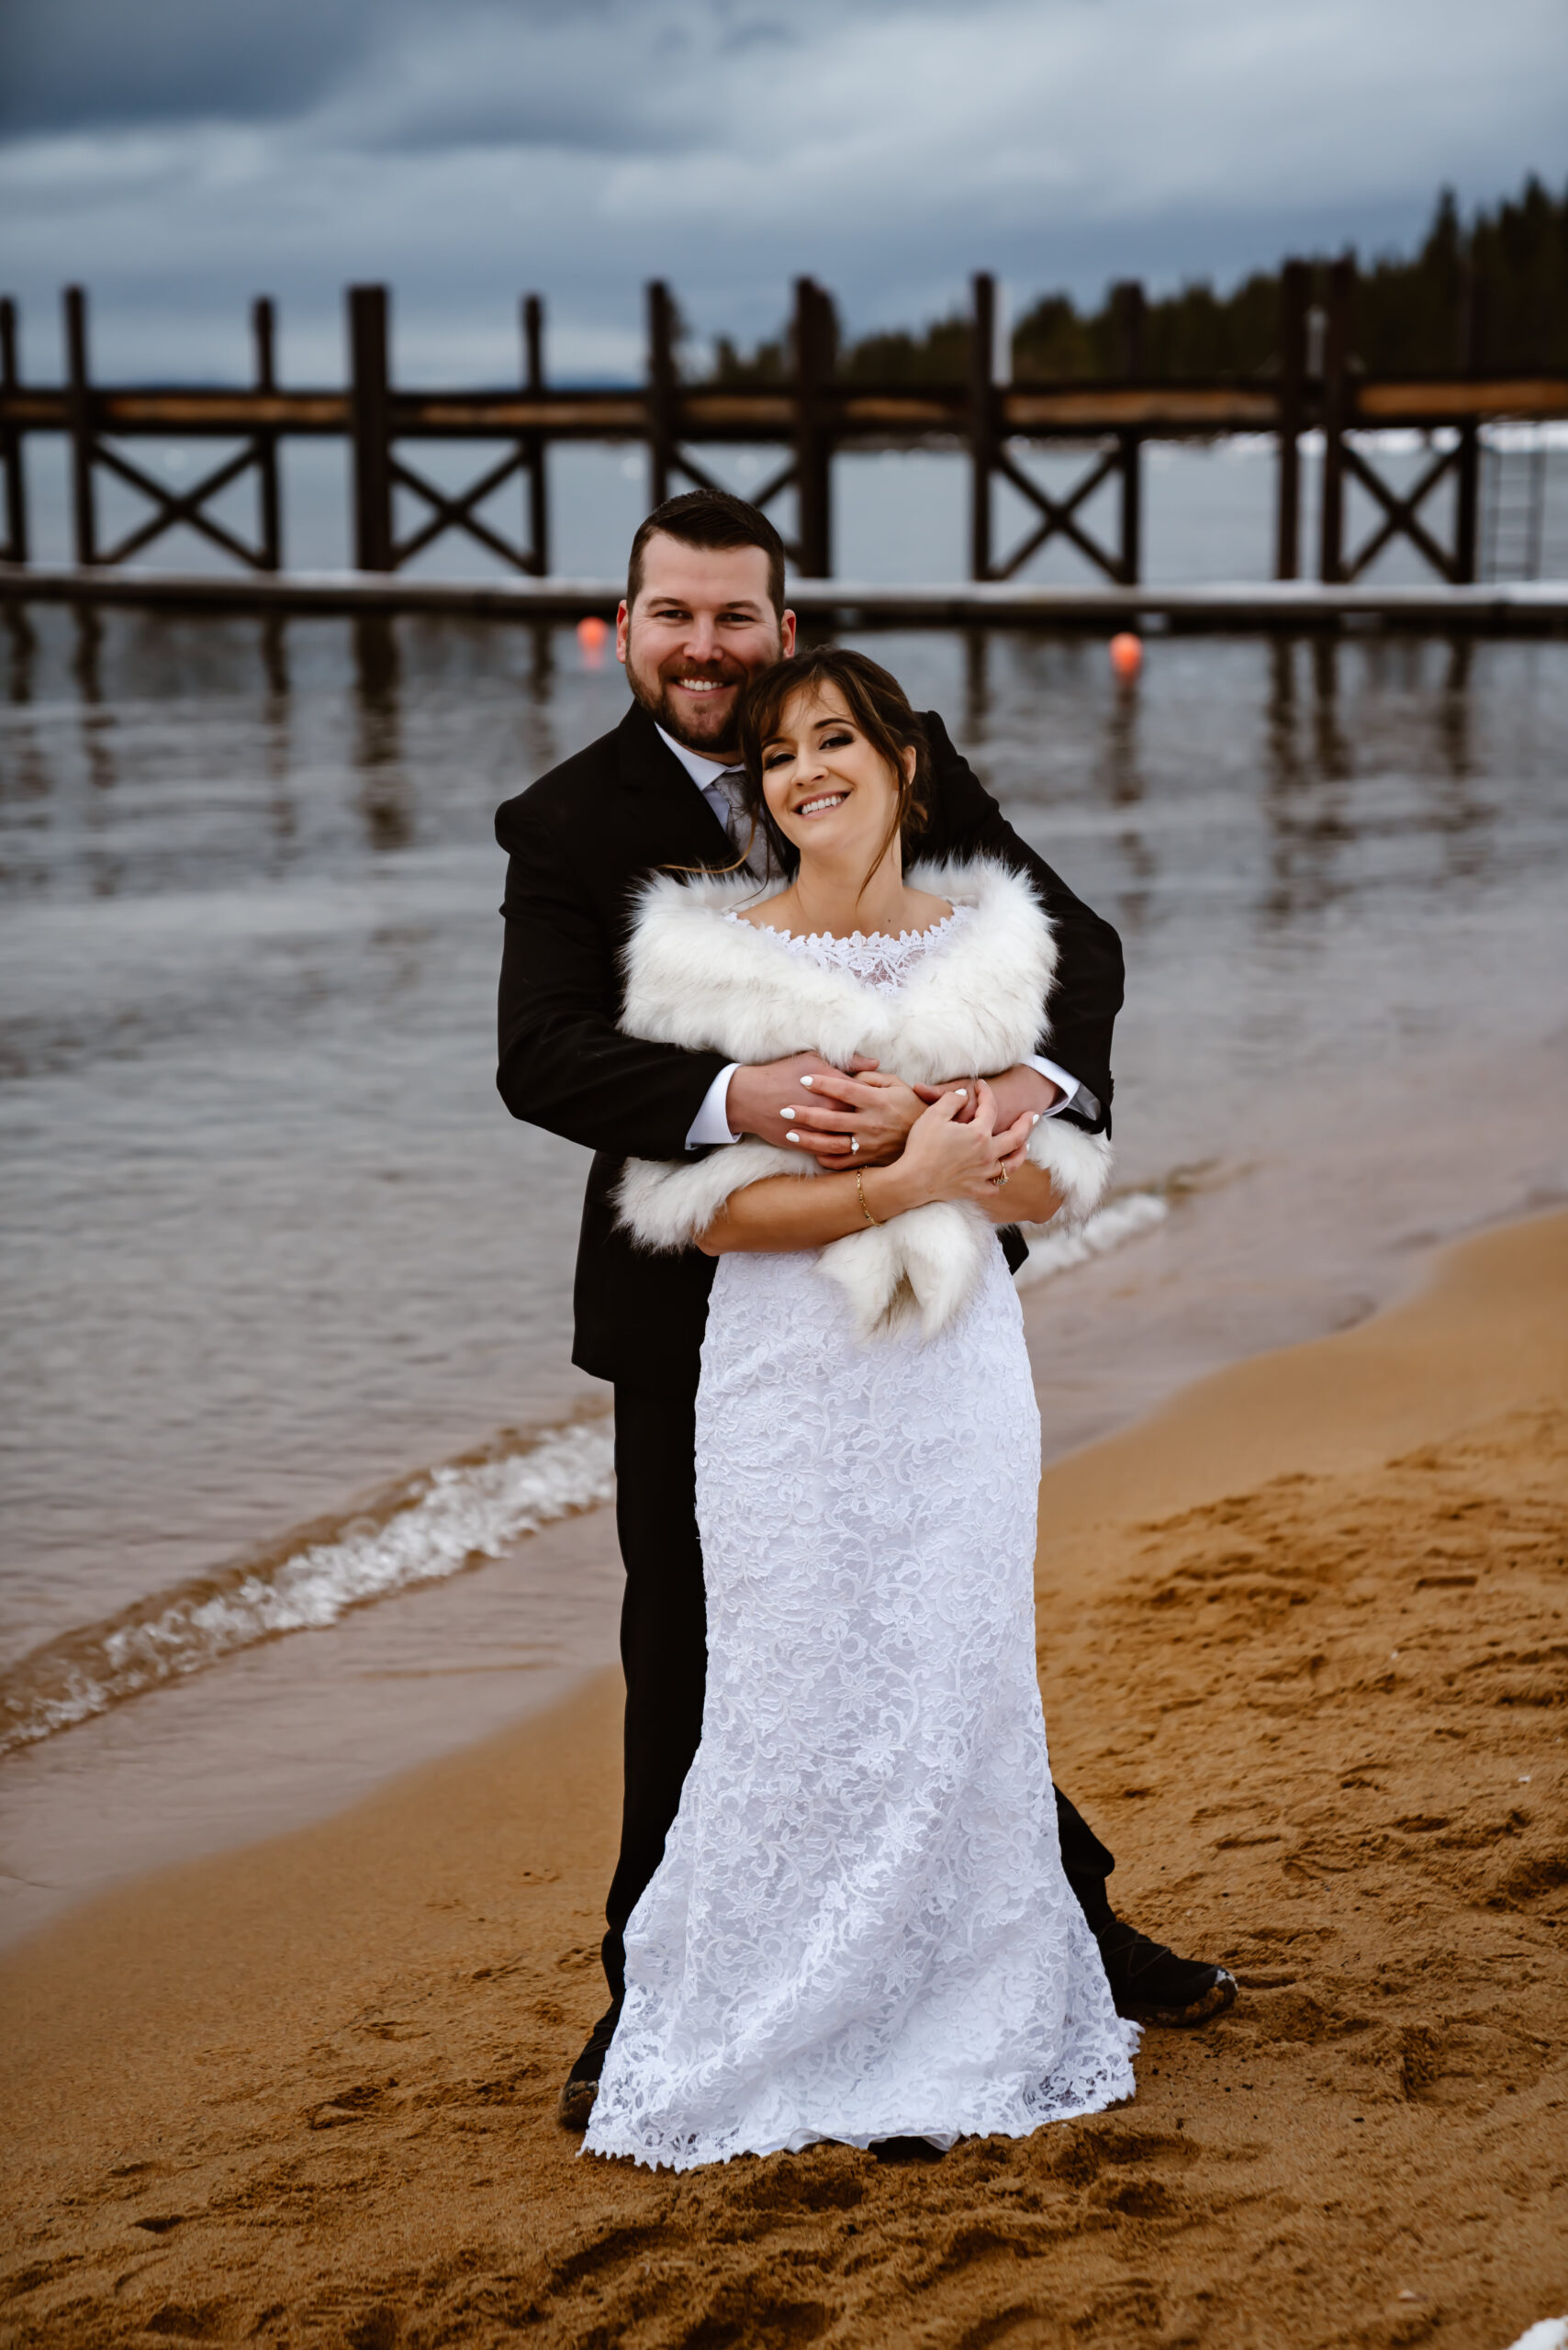 A bride and groom standing on the beach next to a pier for their elopement day